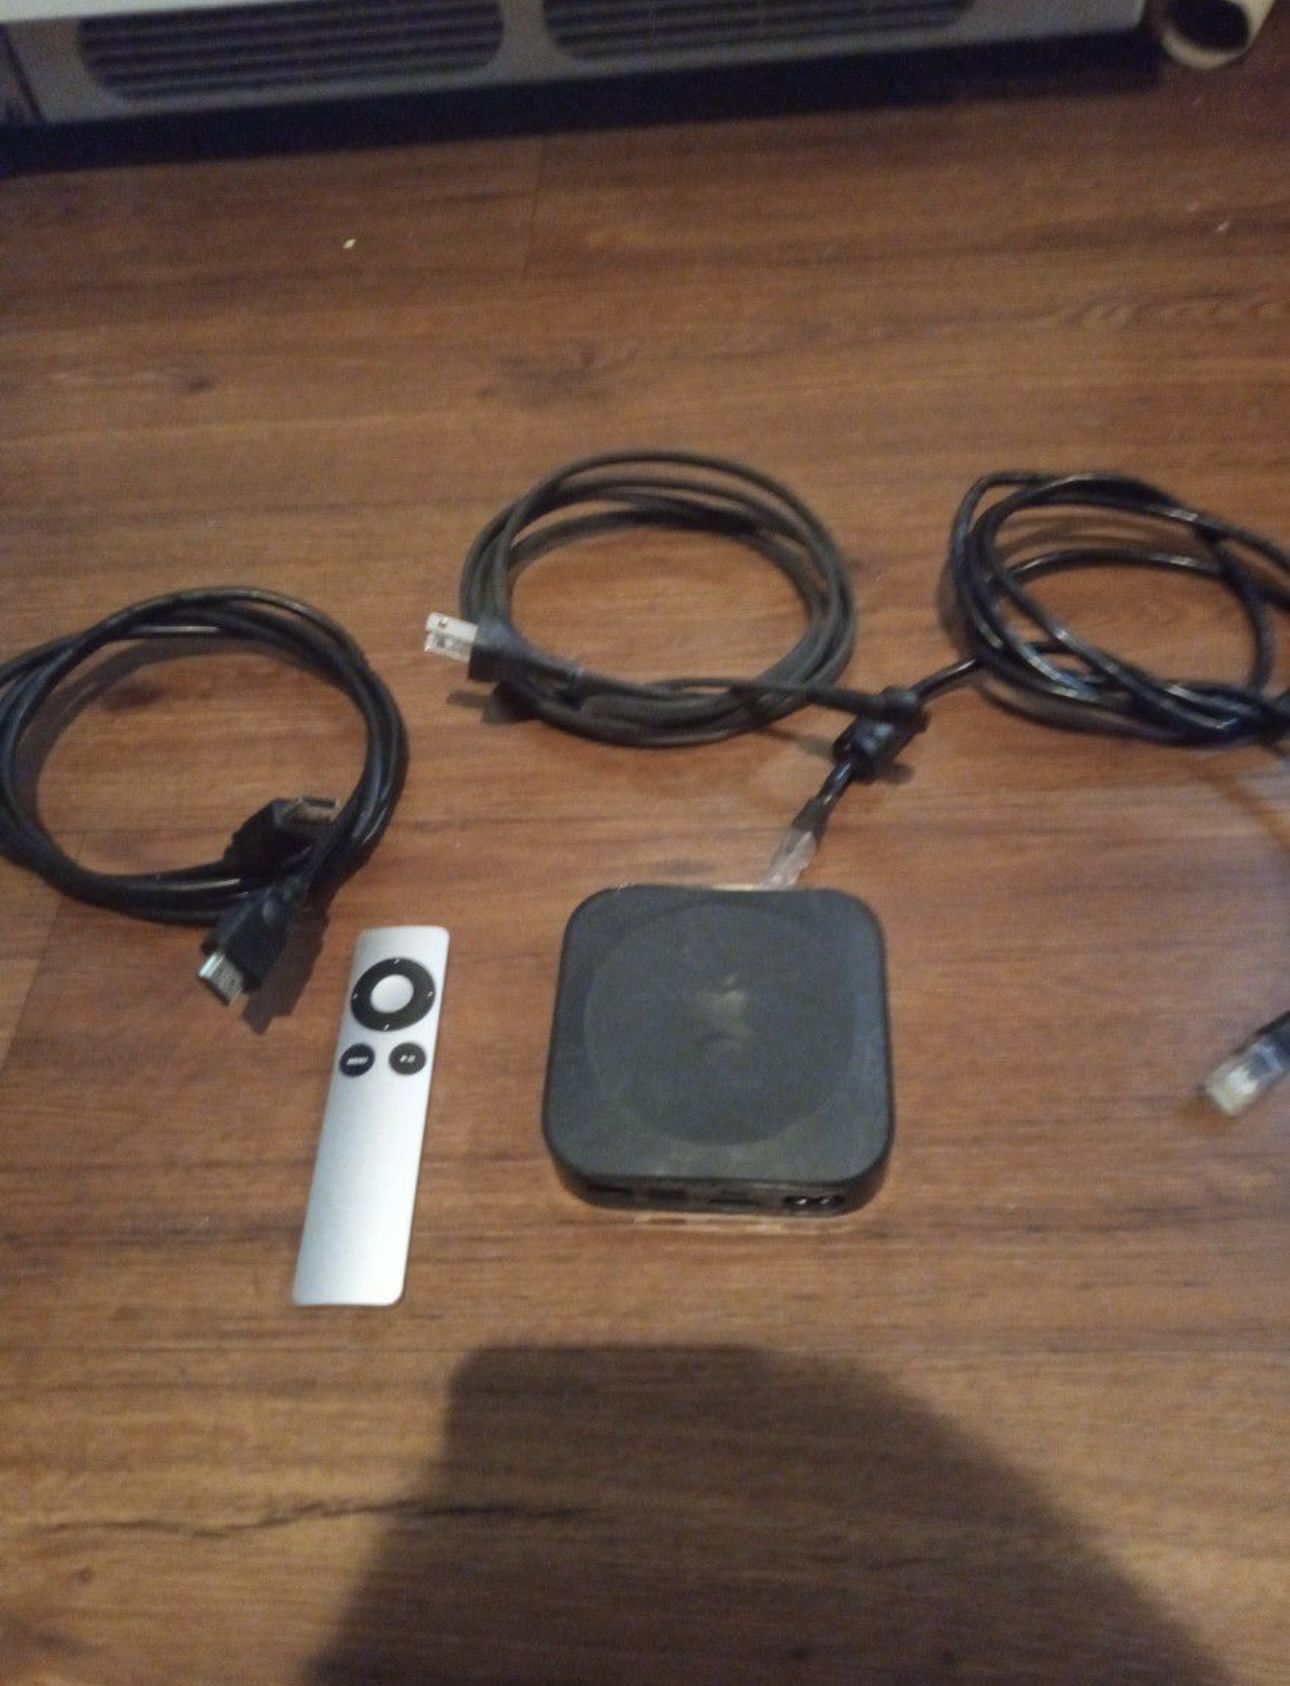 Apple TV Box Mode 1469 With Remote